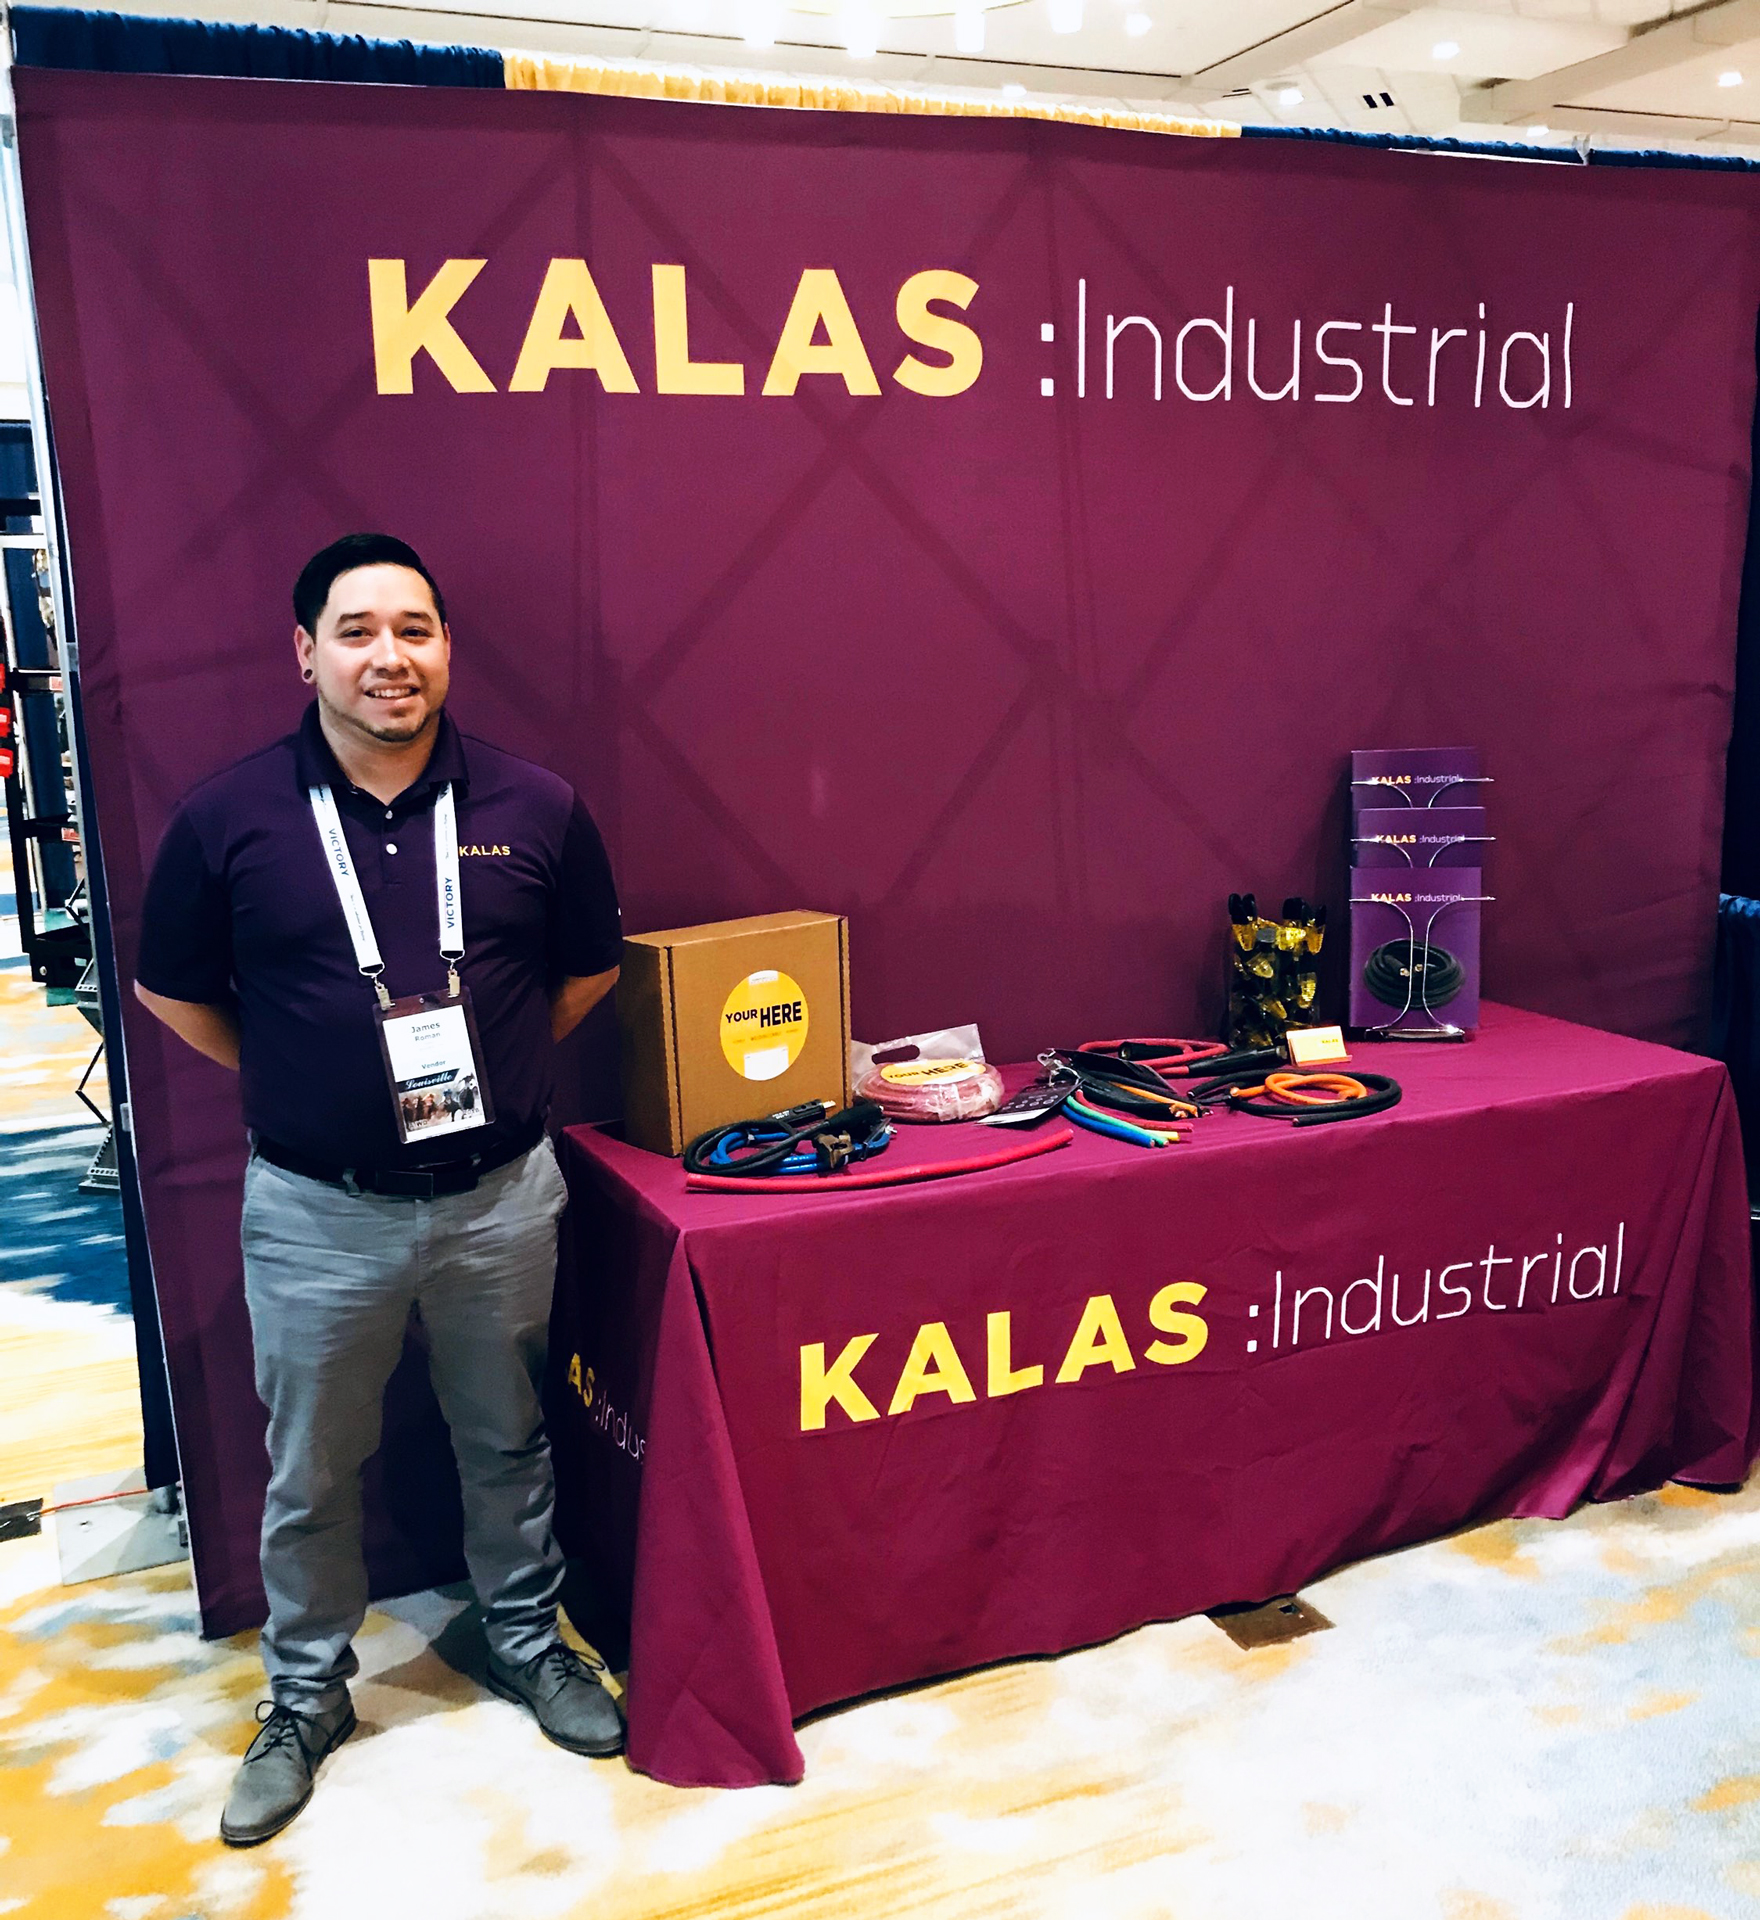 Come visit KALAS in booth #514 at the AIWD Annual Convention!